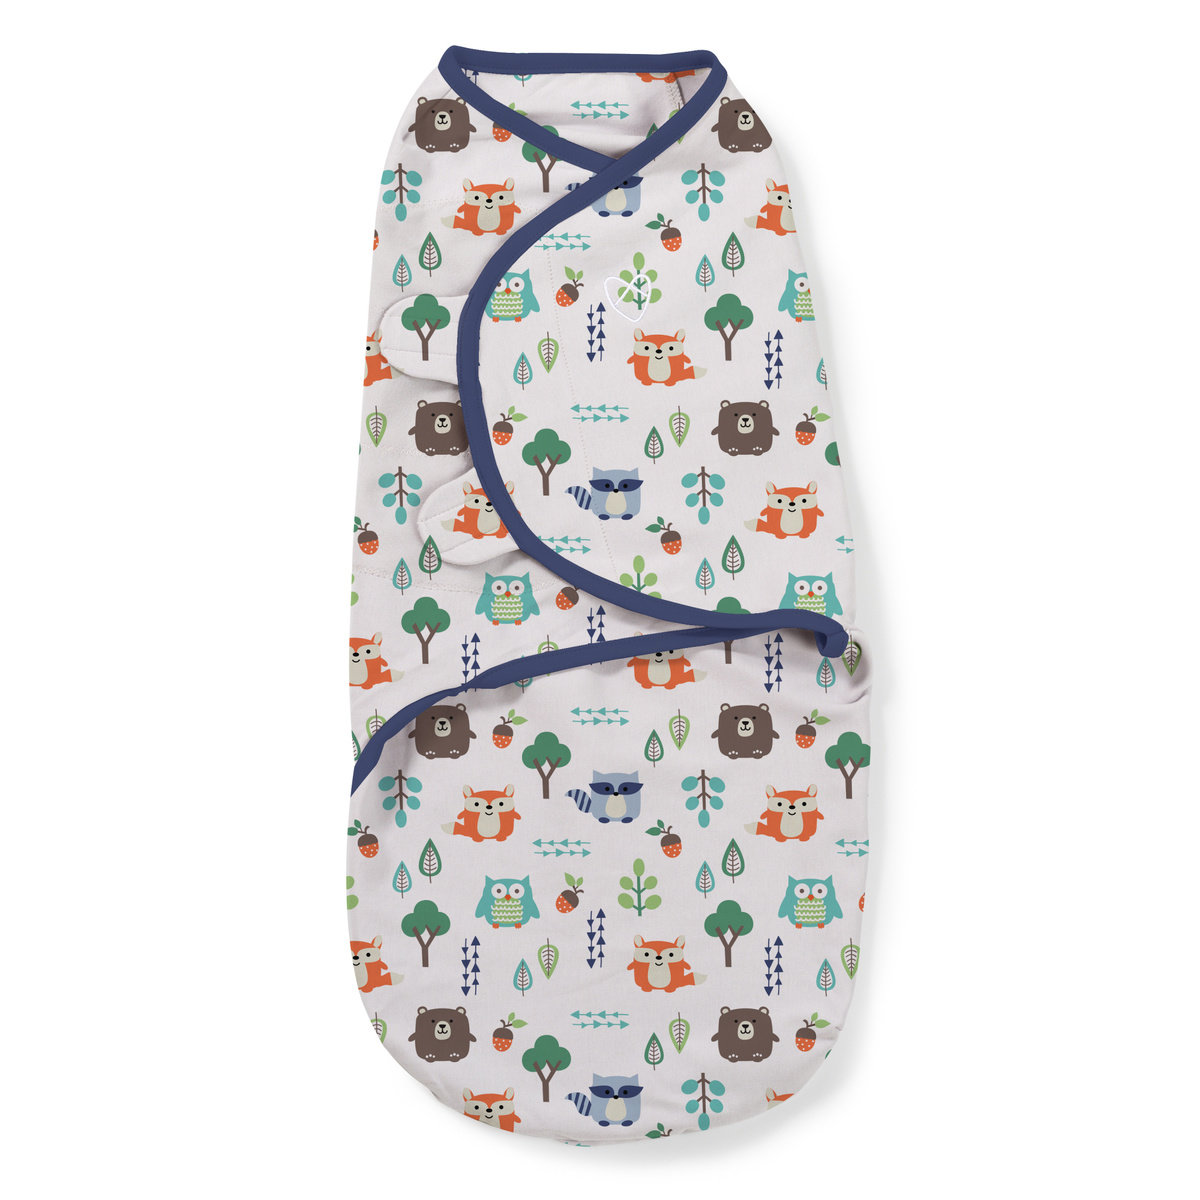 Swaddle blanket SwaddleMe S blue / forest motif 2pc - banaby.co.uk